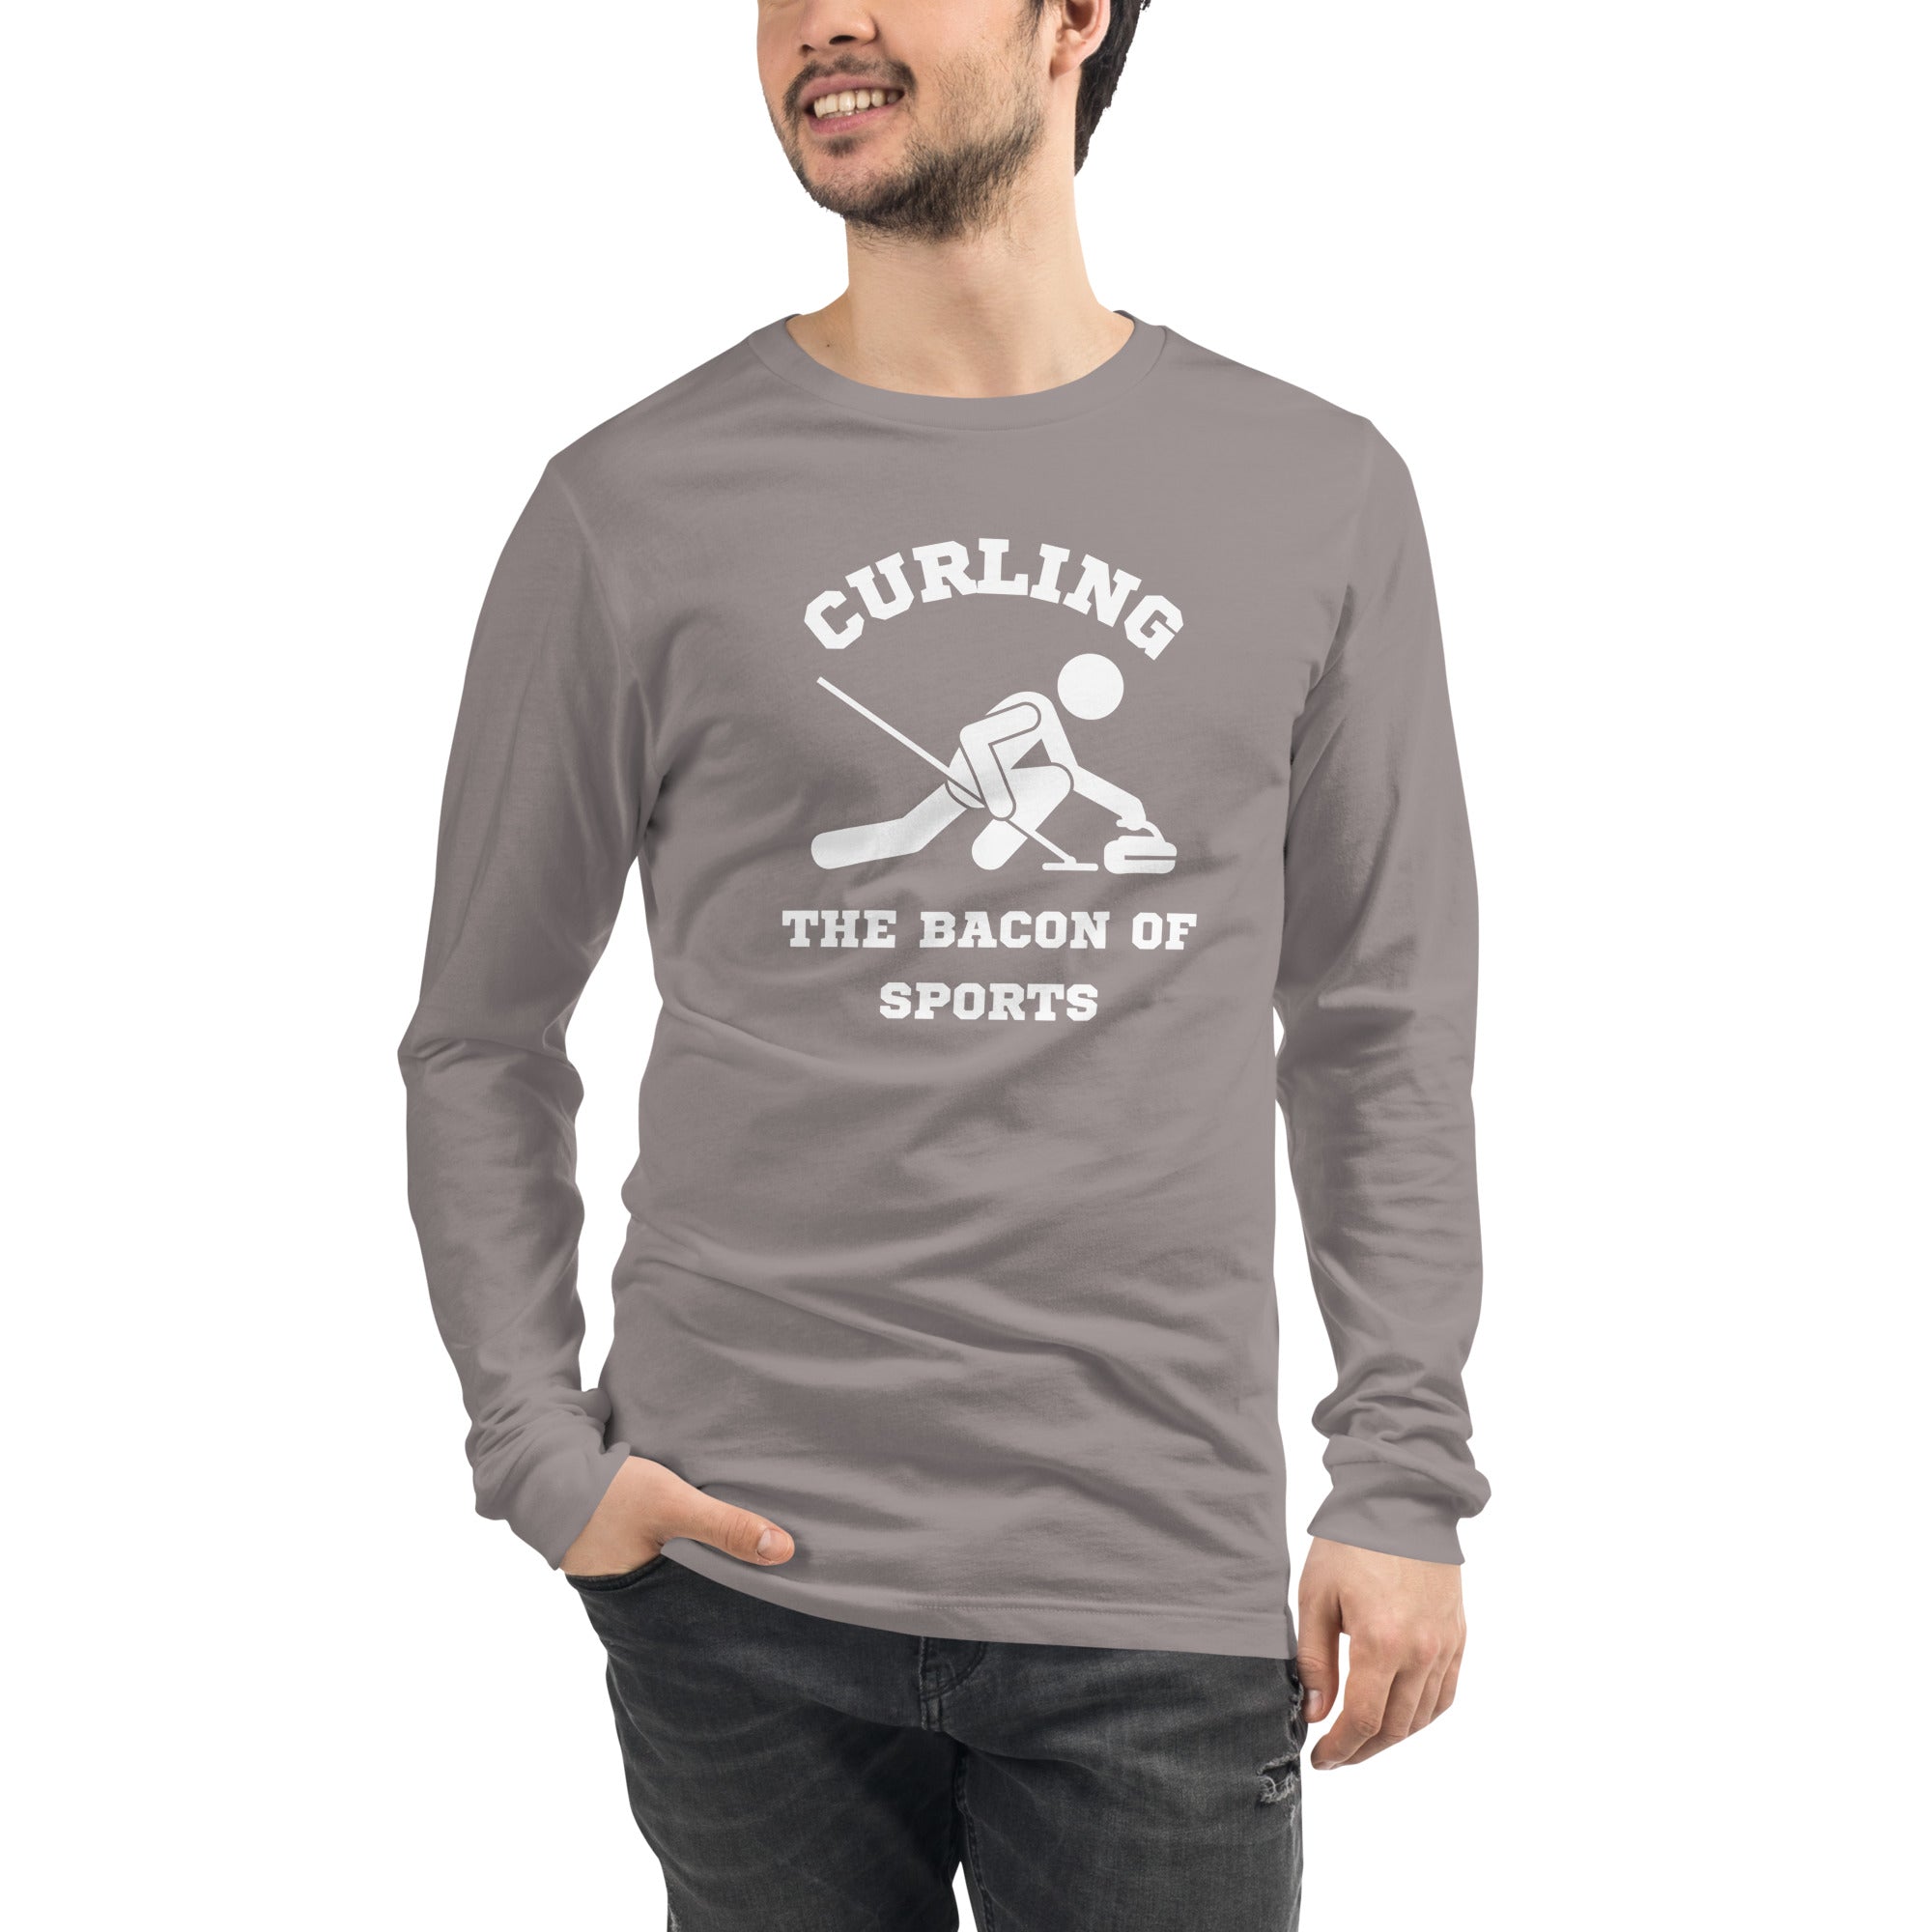 Curling The Bacon Of Sports Men's Select Long Sleeve